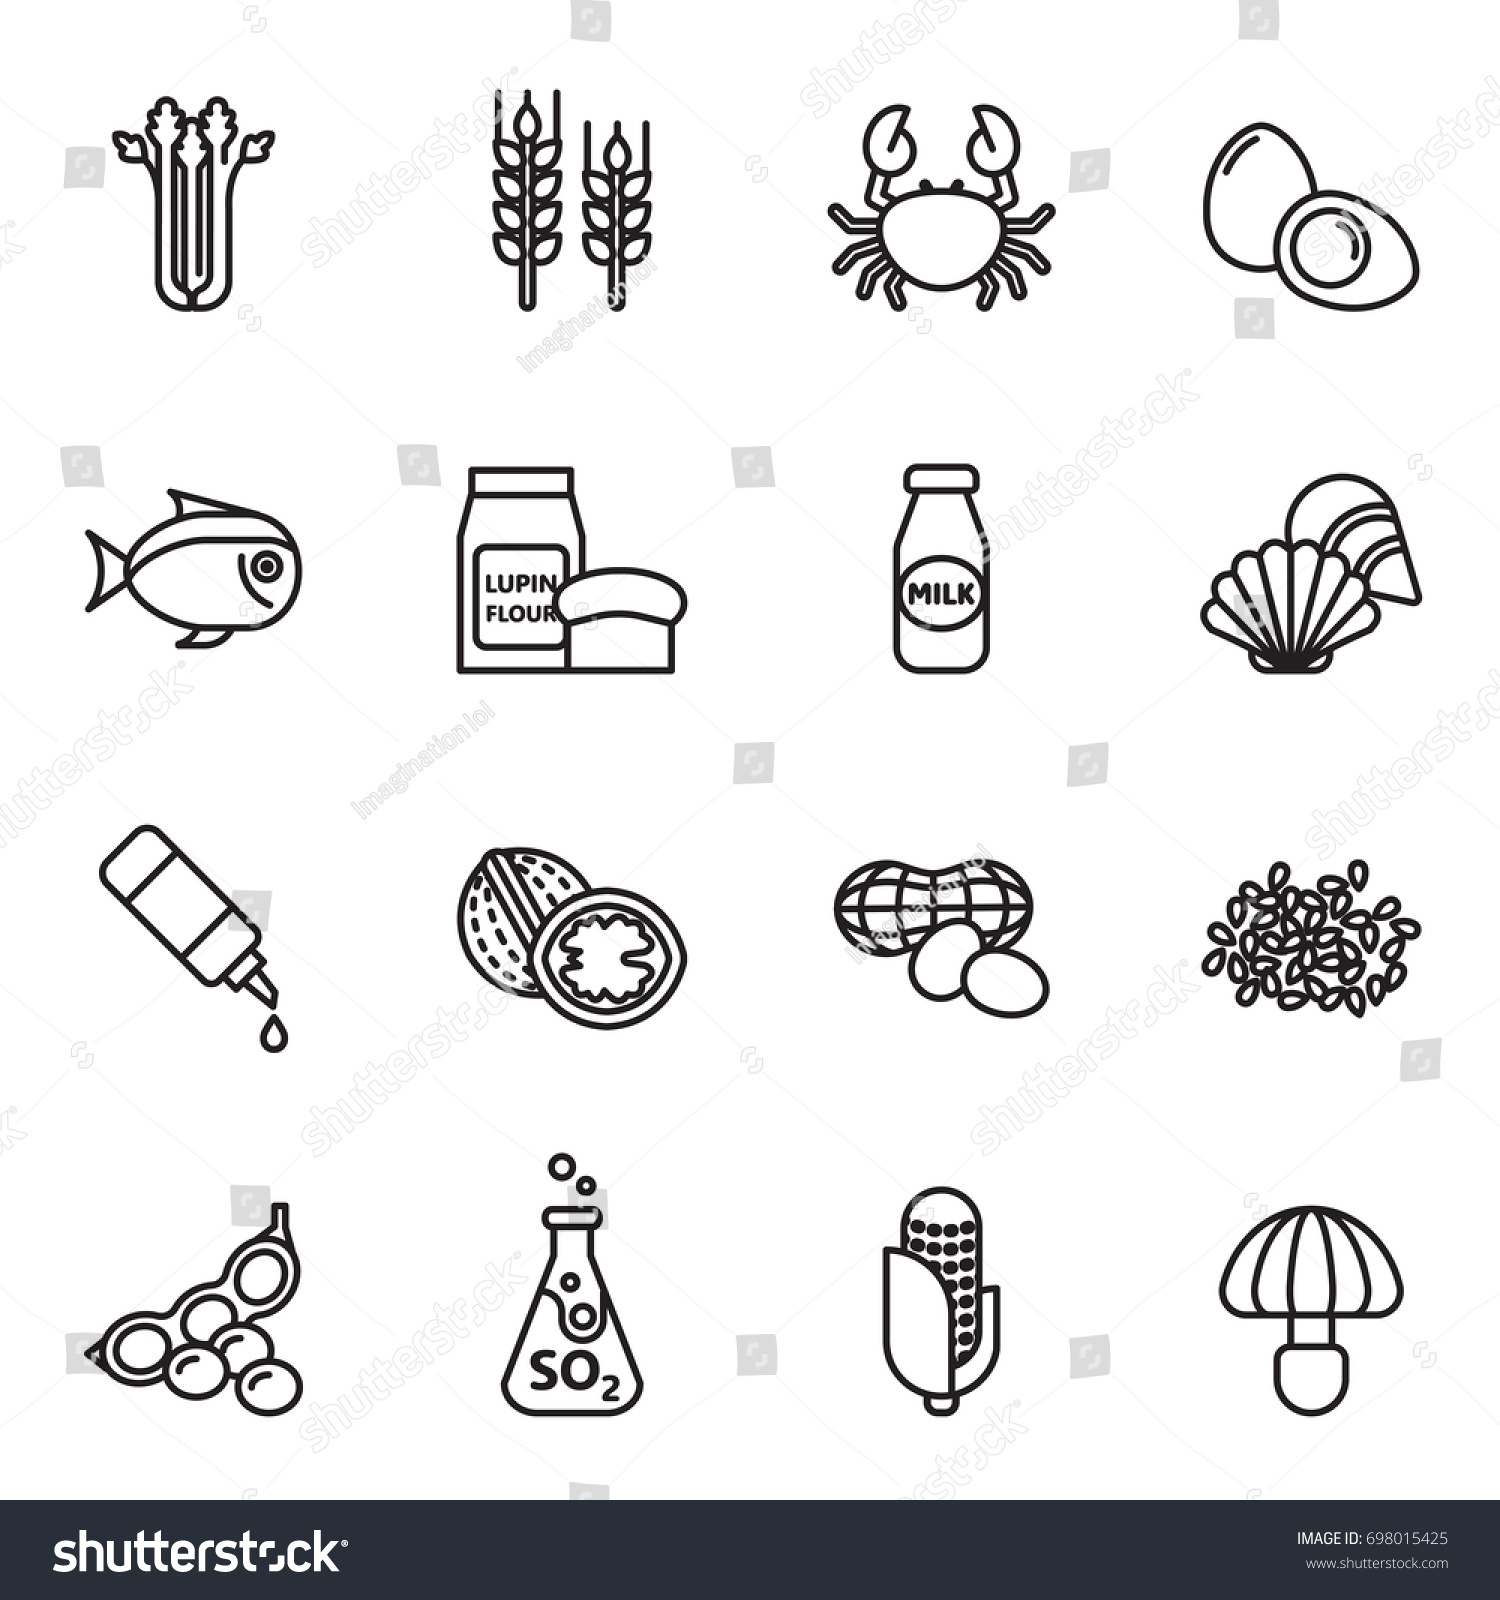 SVG of Food Allergen Icons set. Line Style stock vector. svg